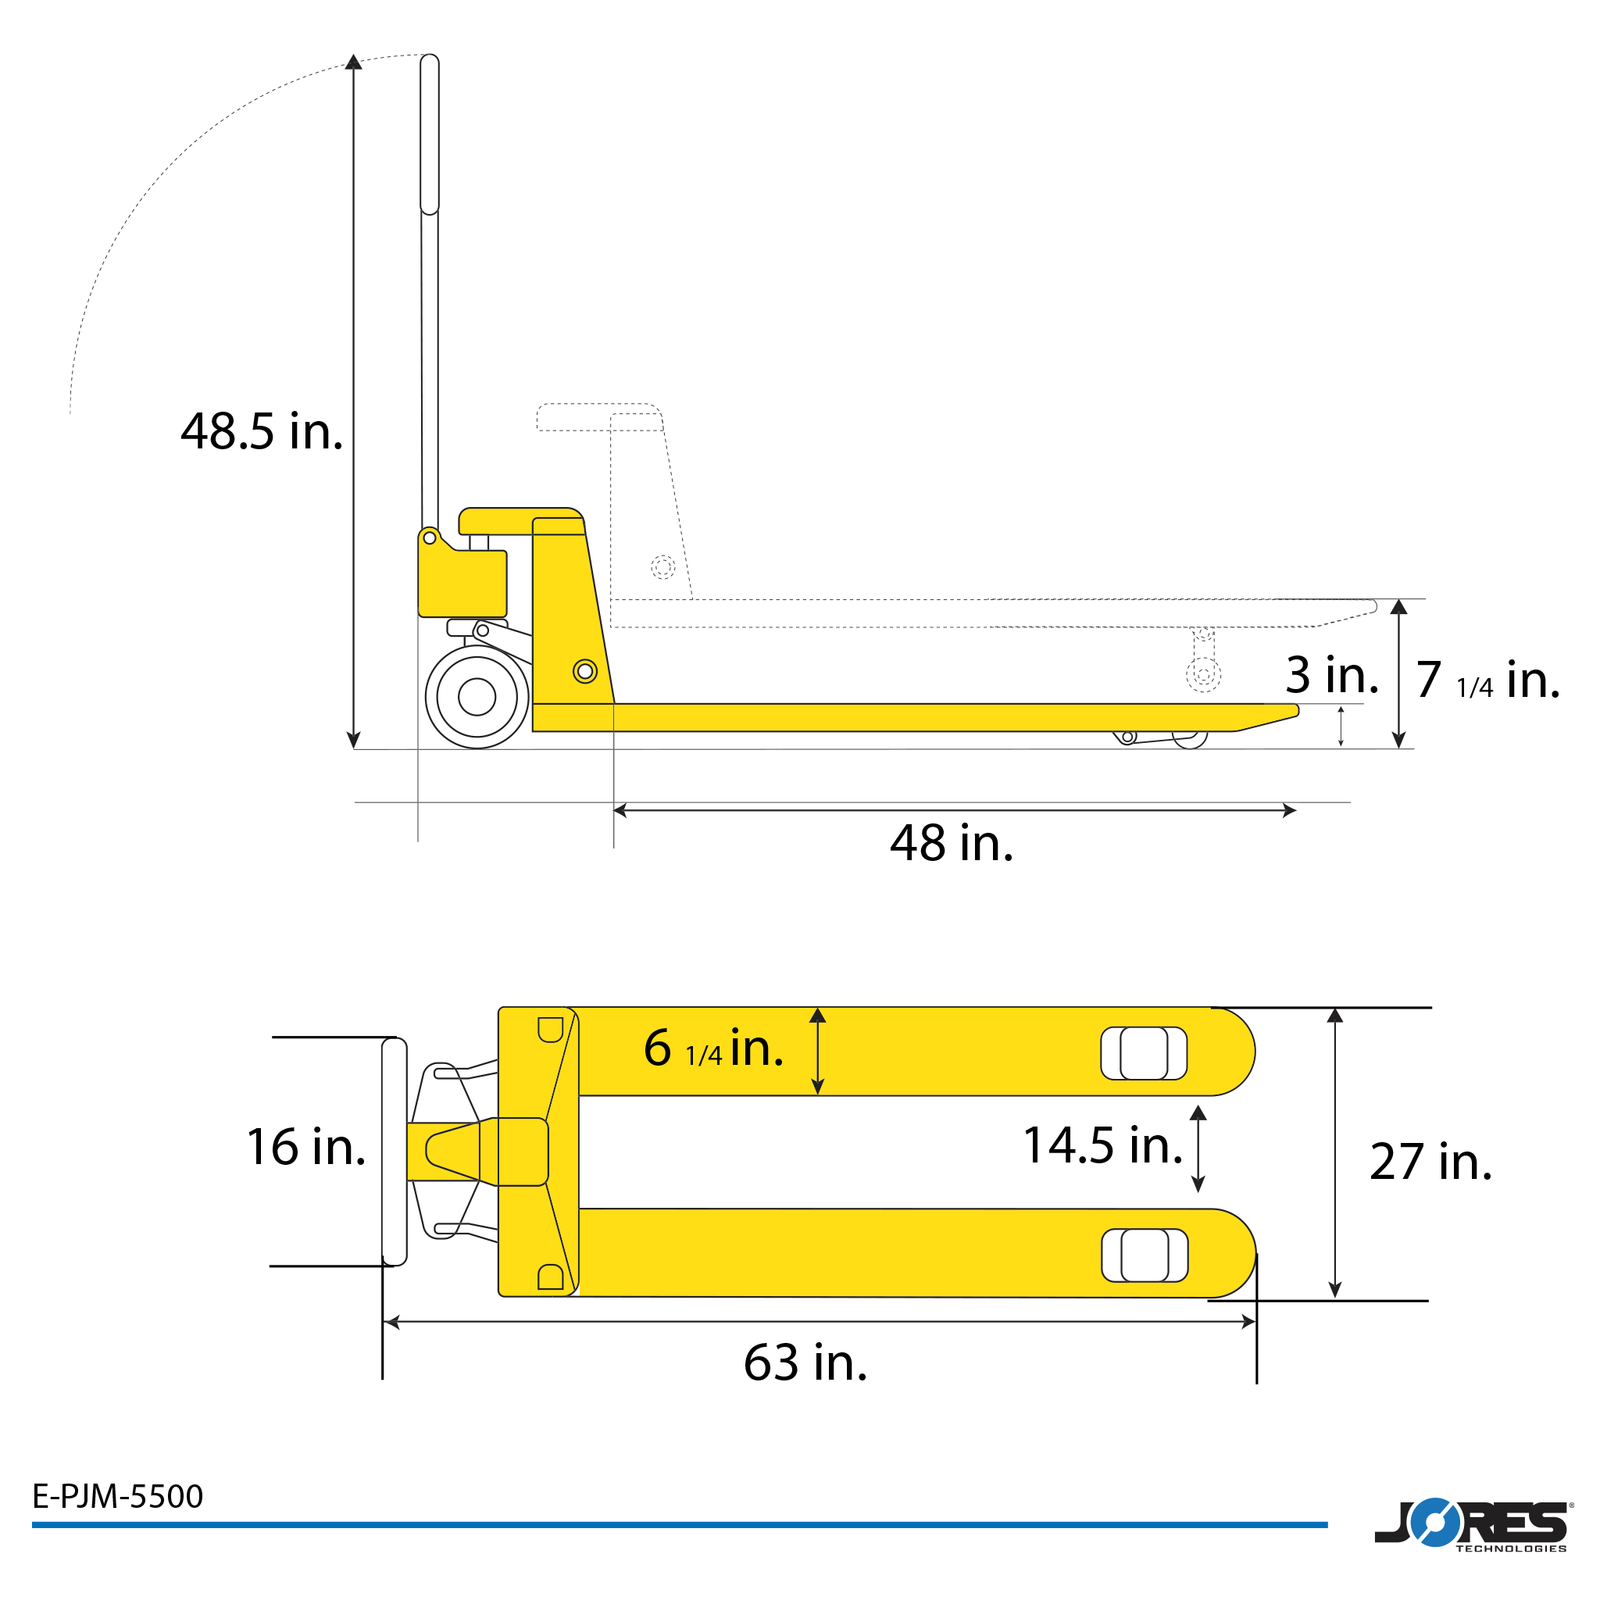 Diagram showing the dimensions of the JORES TECHNOLOGIES® Pallet Jack for 5500 pounds